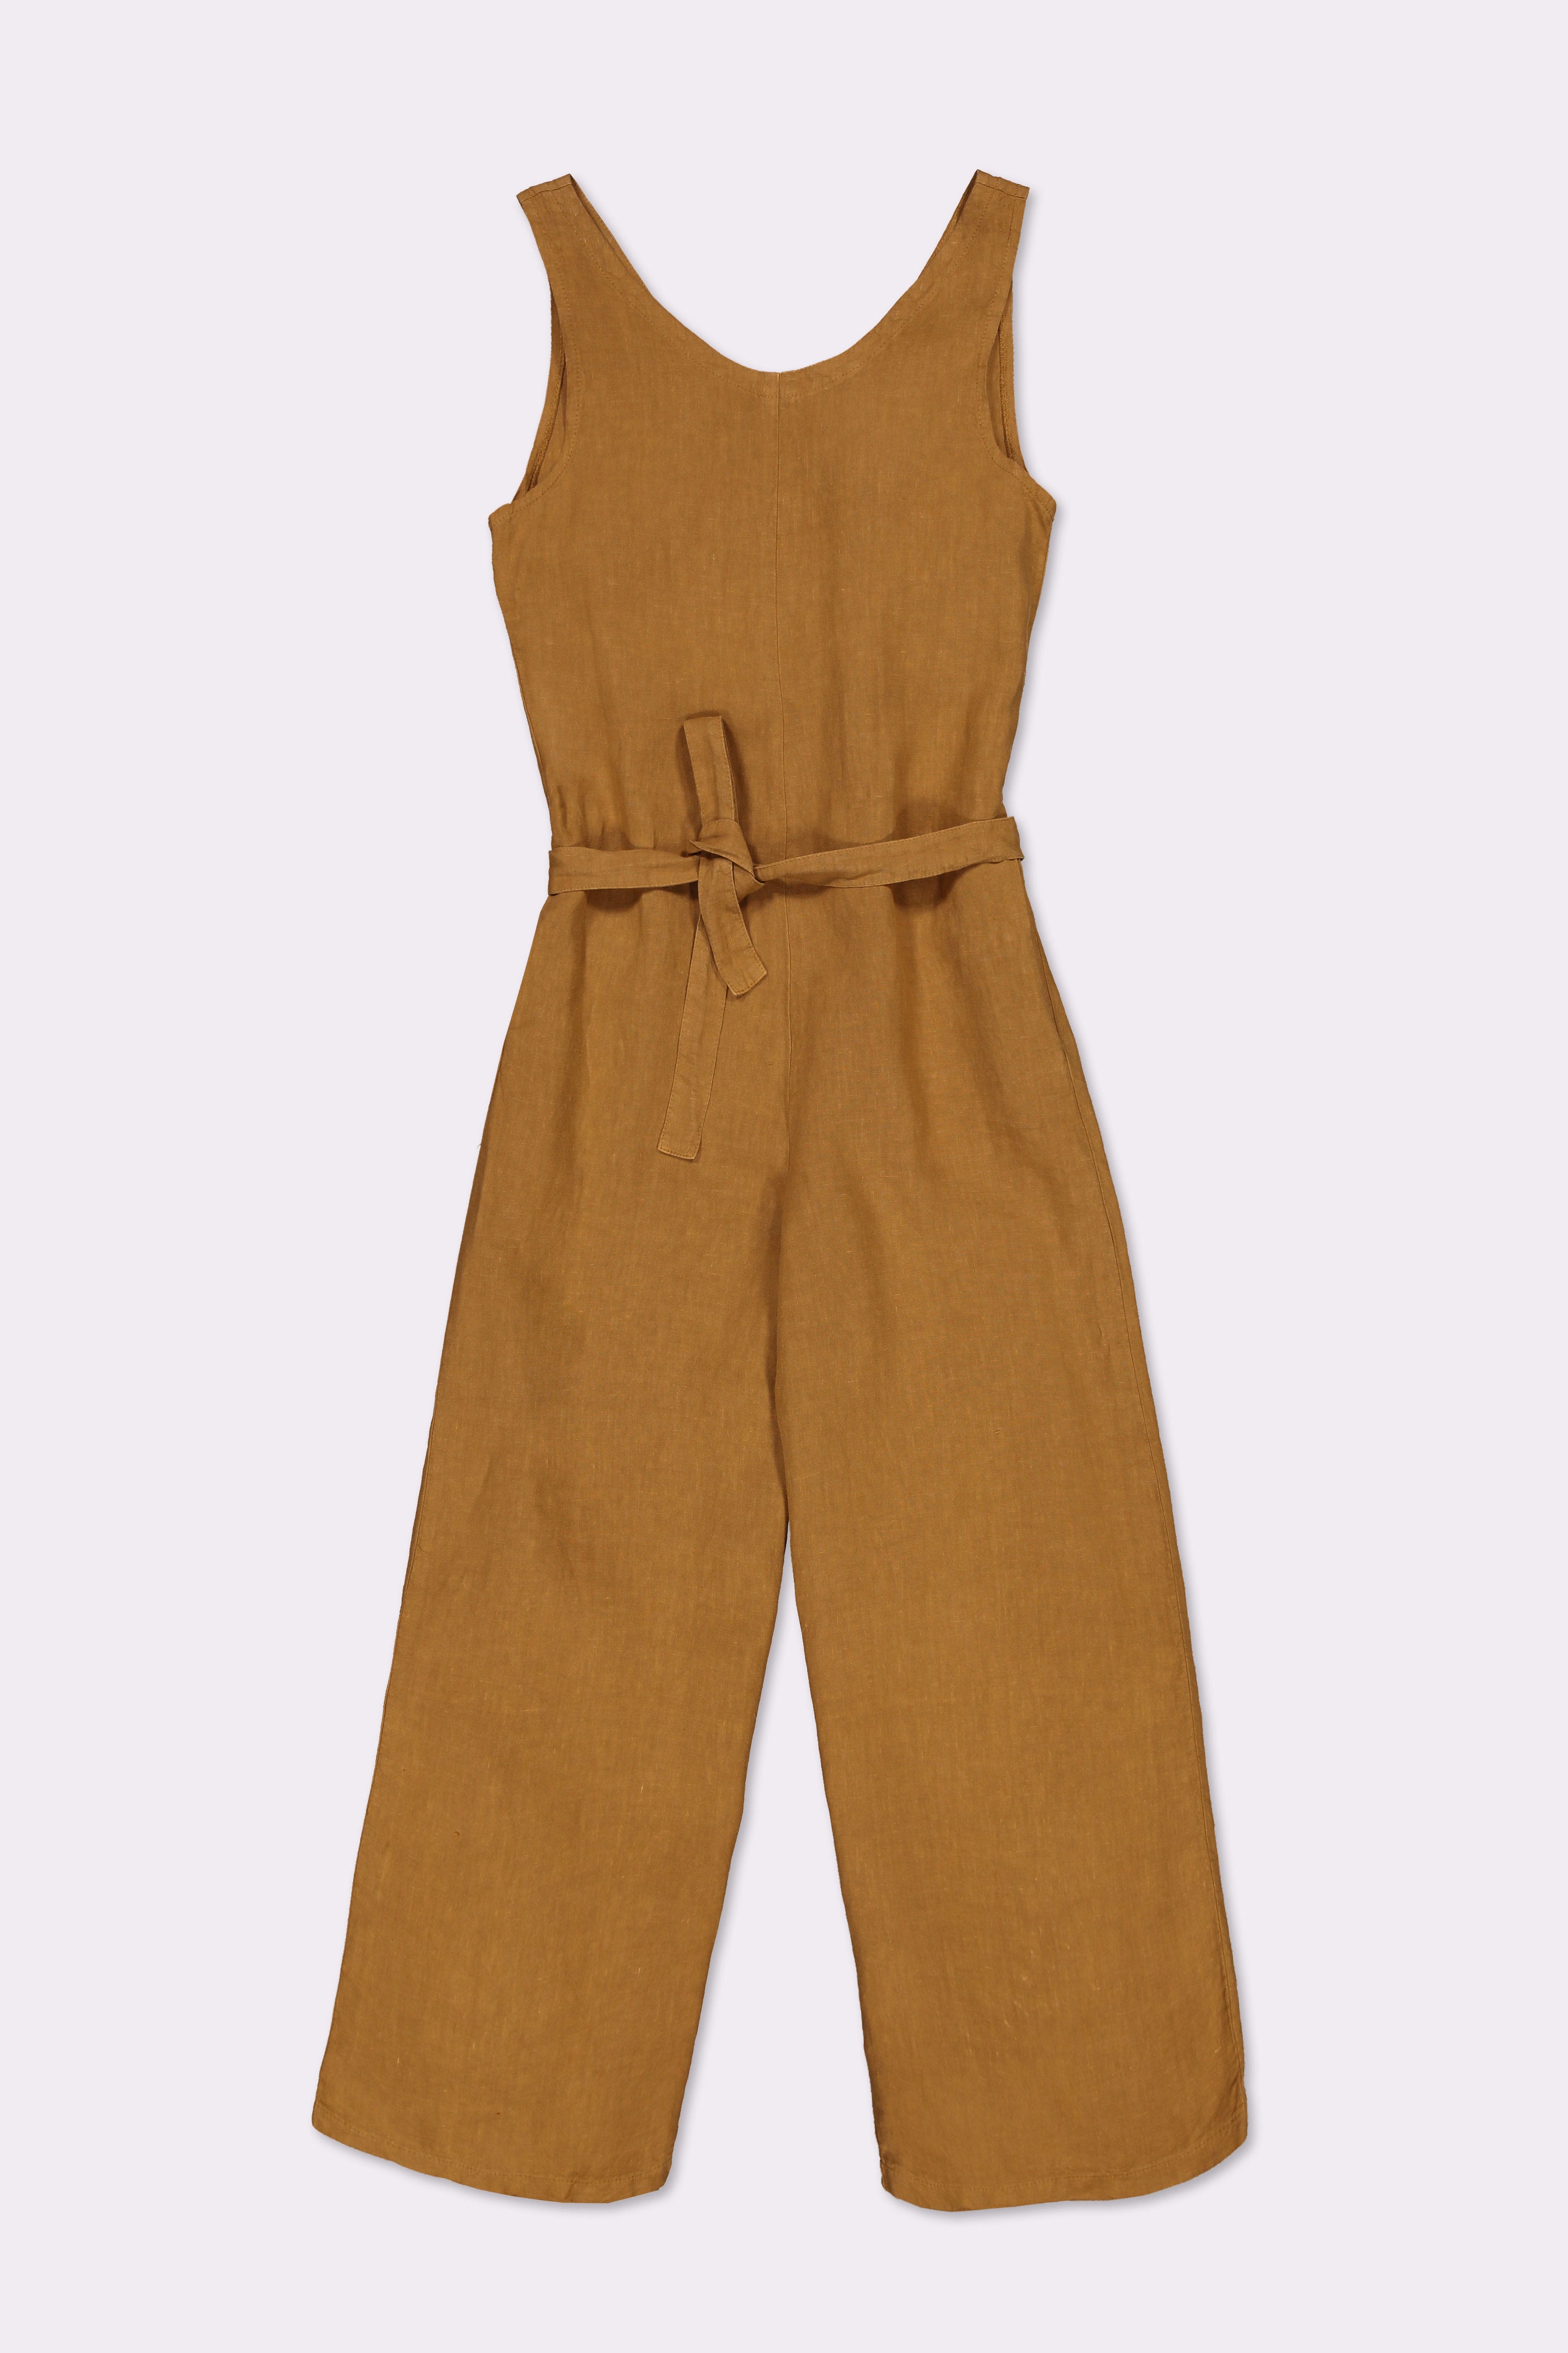 100% linen jumpsuit in rust with a relaxed cut and wide legs.features a round neck and a v-cut back with buttons for an easy dress and side pockets. With a detached belt that you can use for a more fitted look.